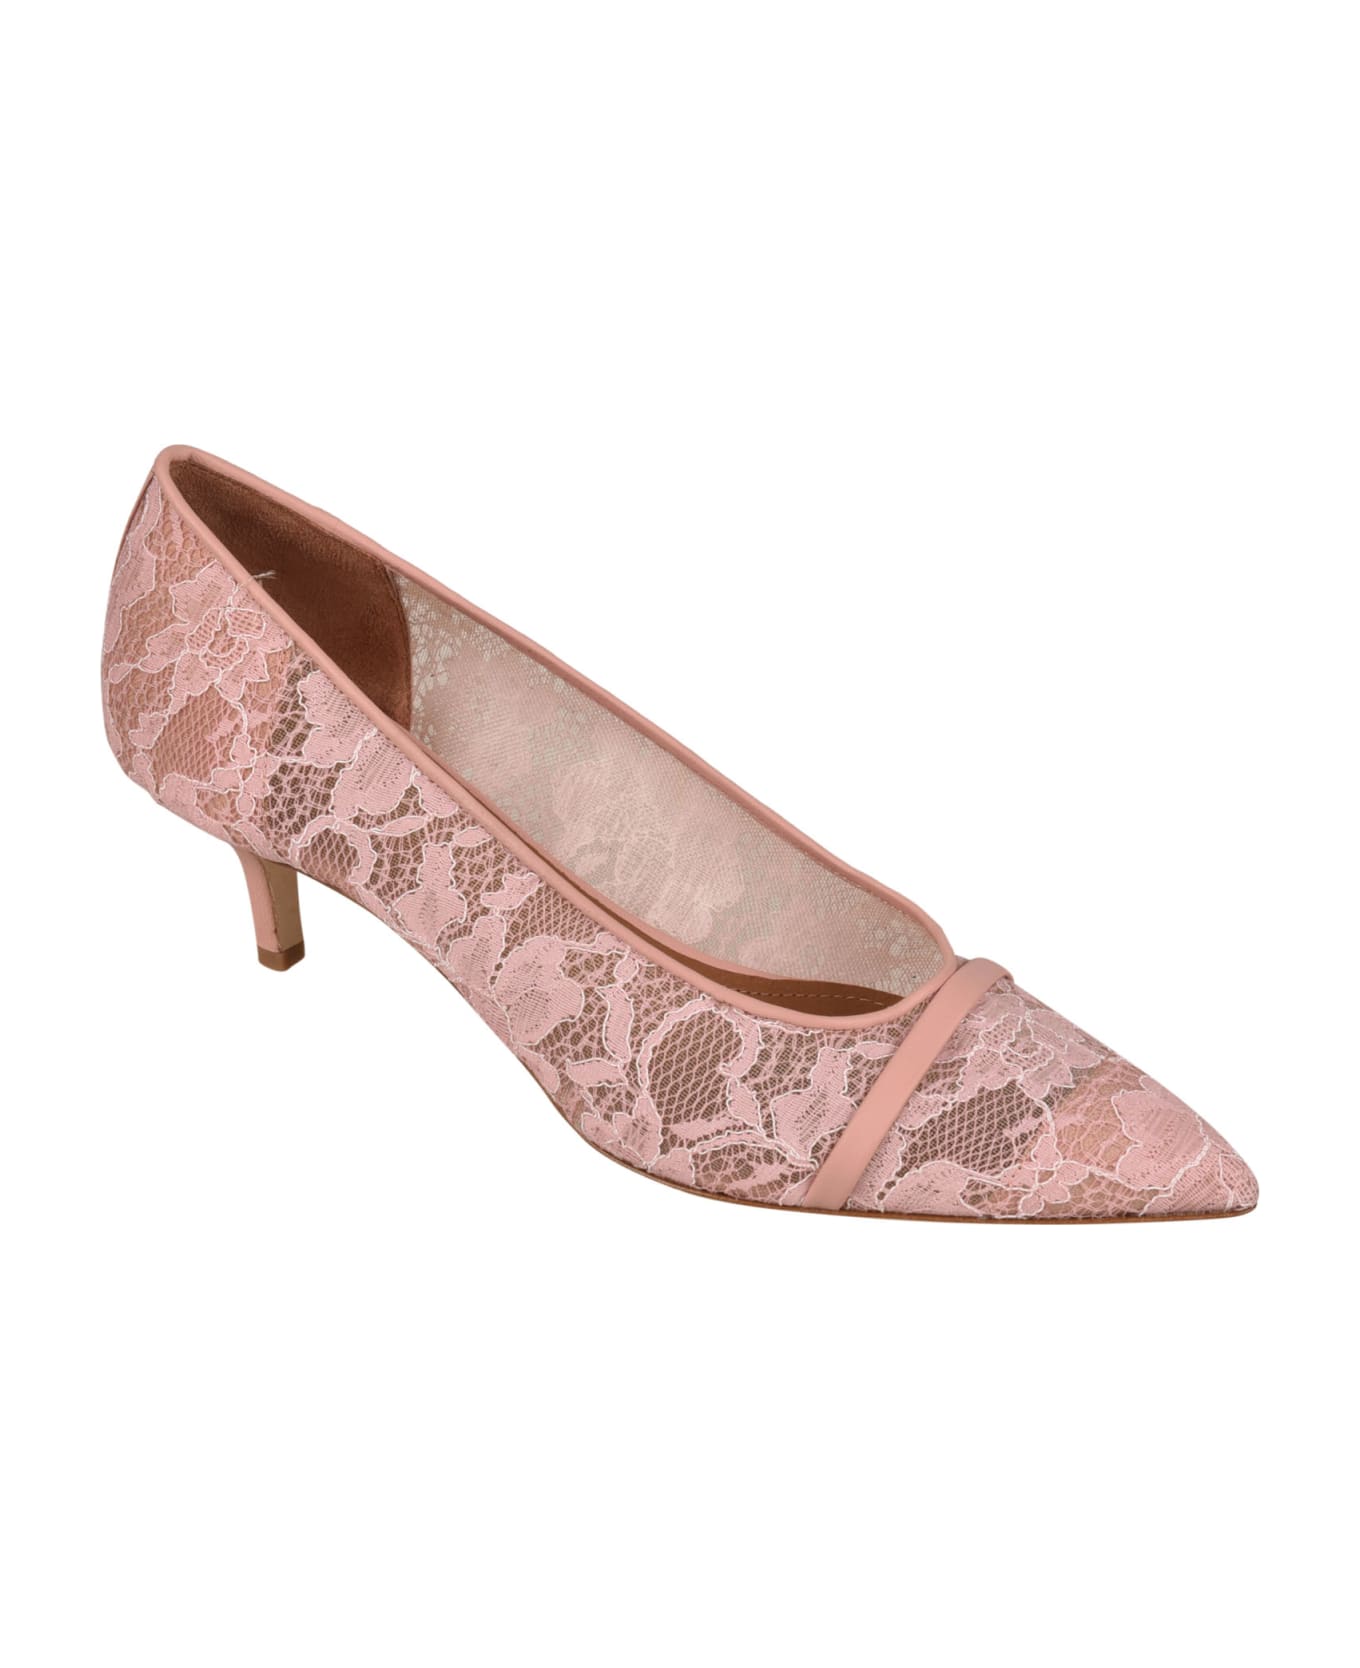 Malone Souliers Floral Lace Pumps - Pink ハイヒール